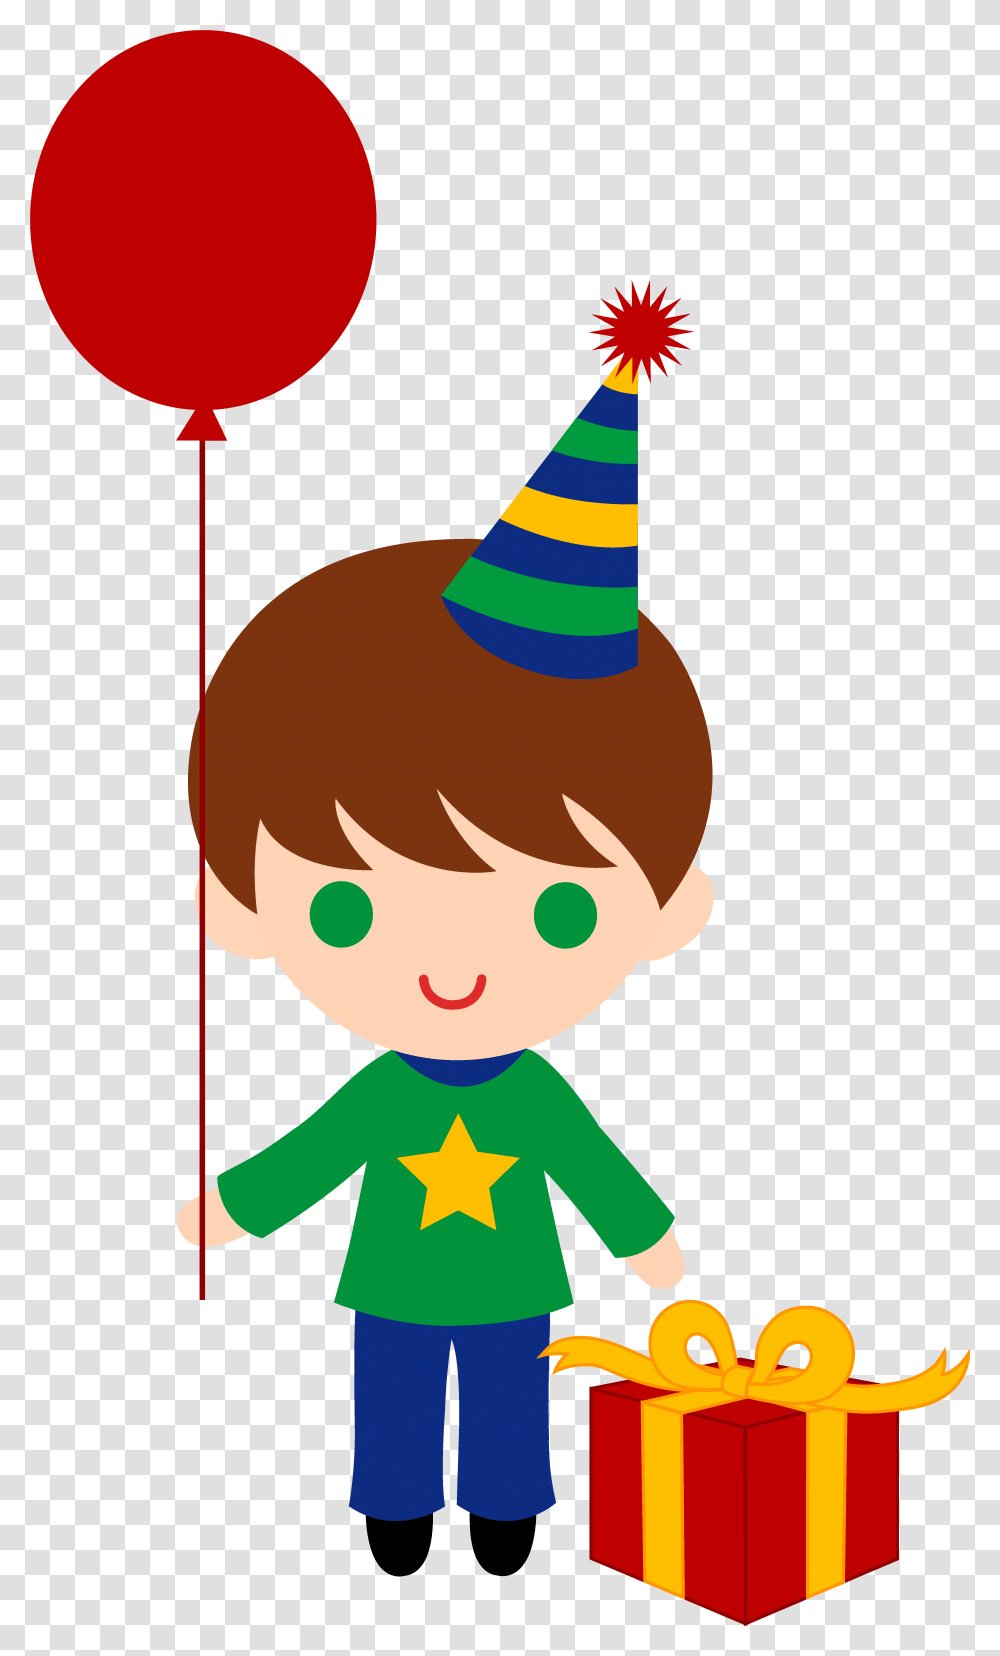 Boy Birthday & Clipart Free Download Ywd Birthday Boy Clip Art, Clothing, Apparel, Party Hat, Elf Transparent Png